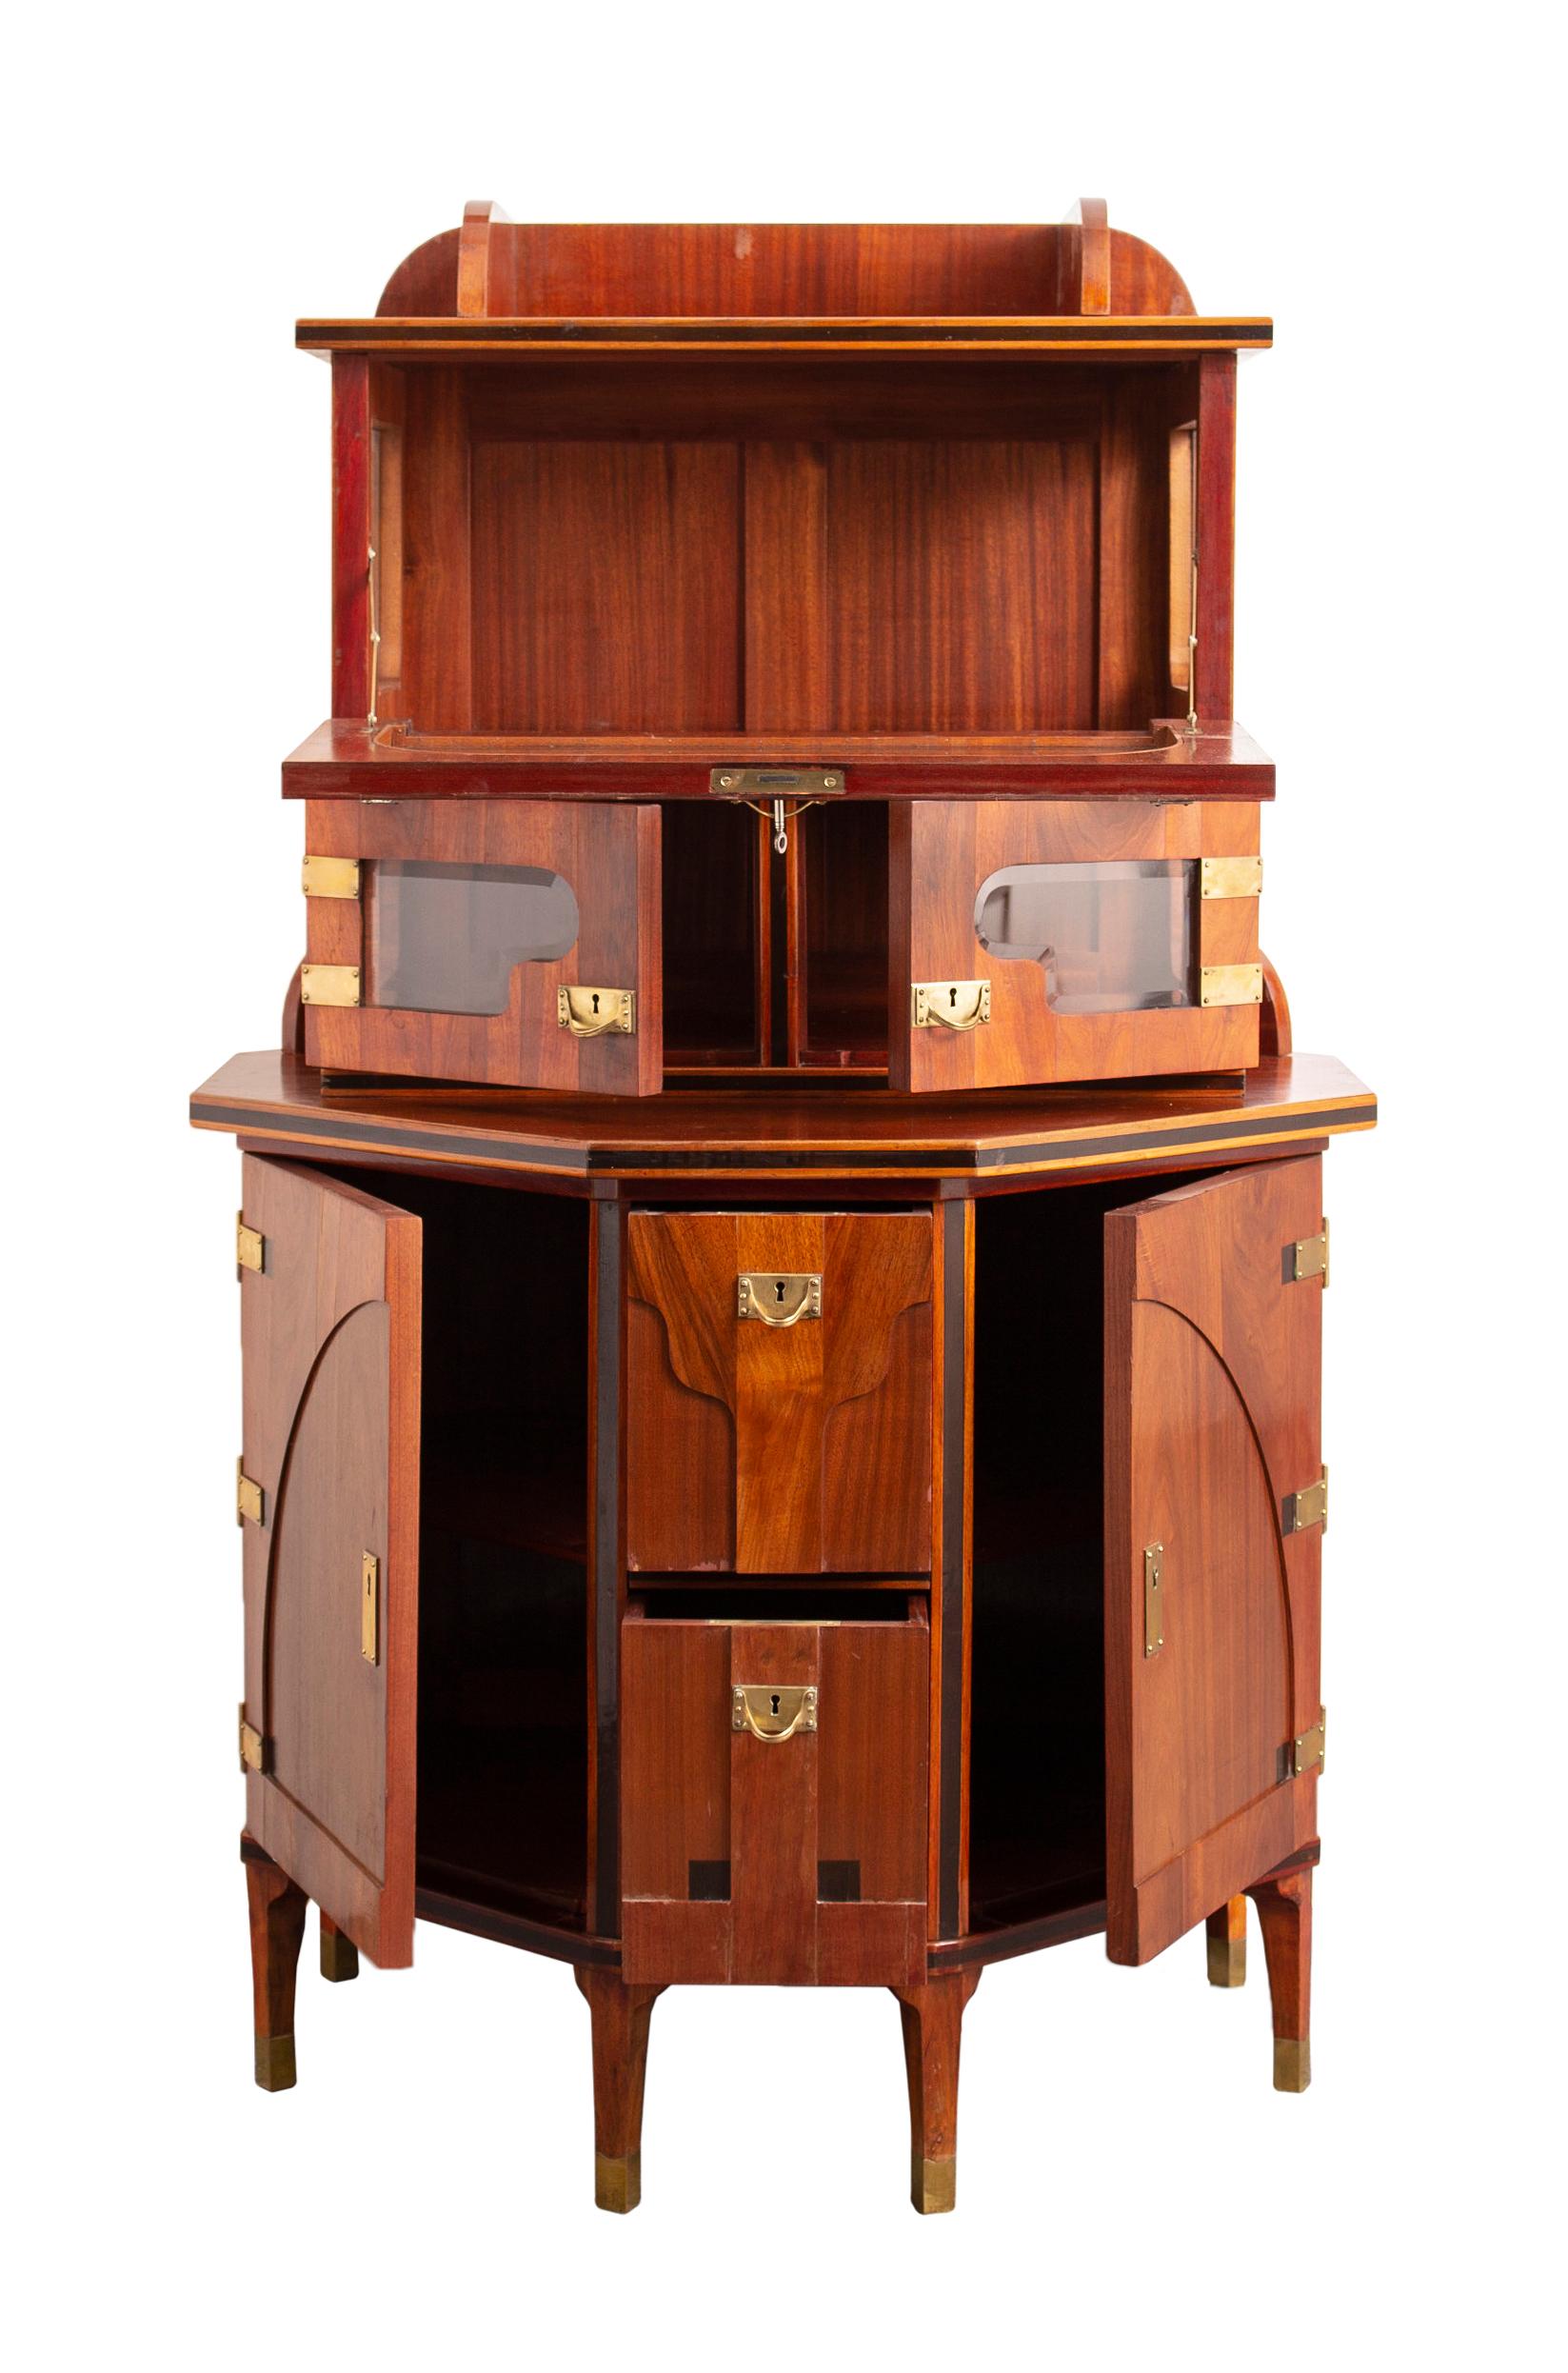 This valuable Art Nouveau cabinet was fabricated by the famous Viennese furniture manufactury August Ungethüm Kunst-Möbel-Fabrik. The cabinet documents the Viennese taste of the epoque and is in it self a rare piece of museum-quality. The cabinet